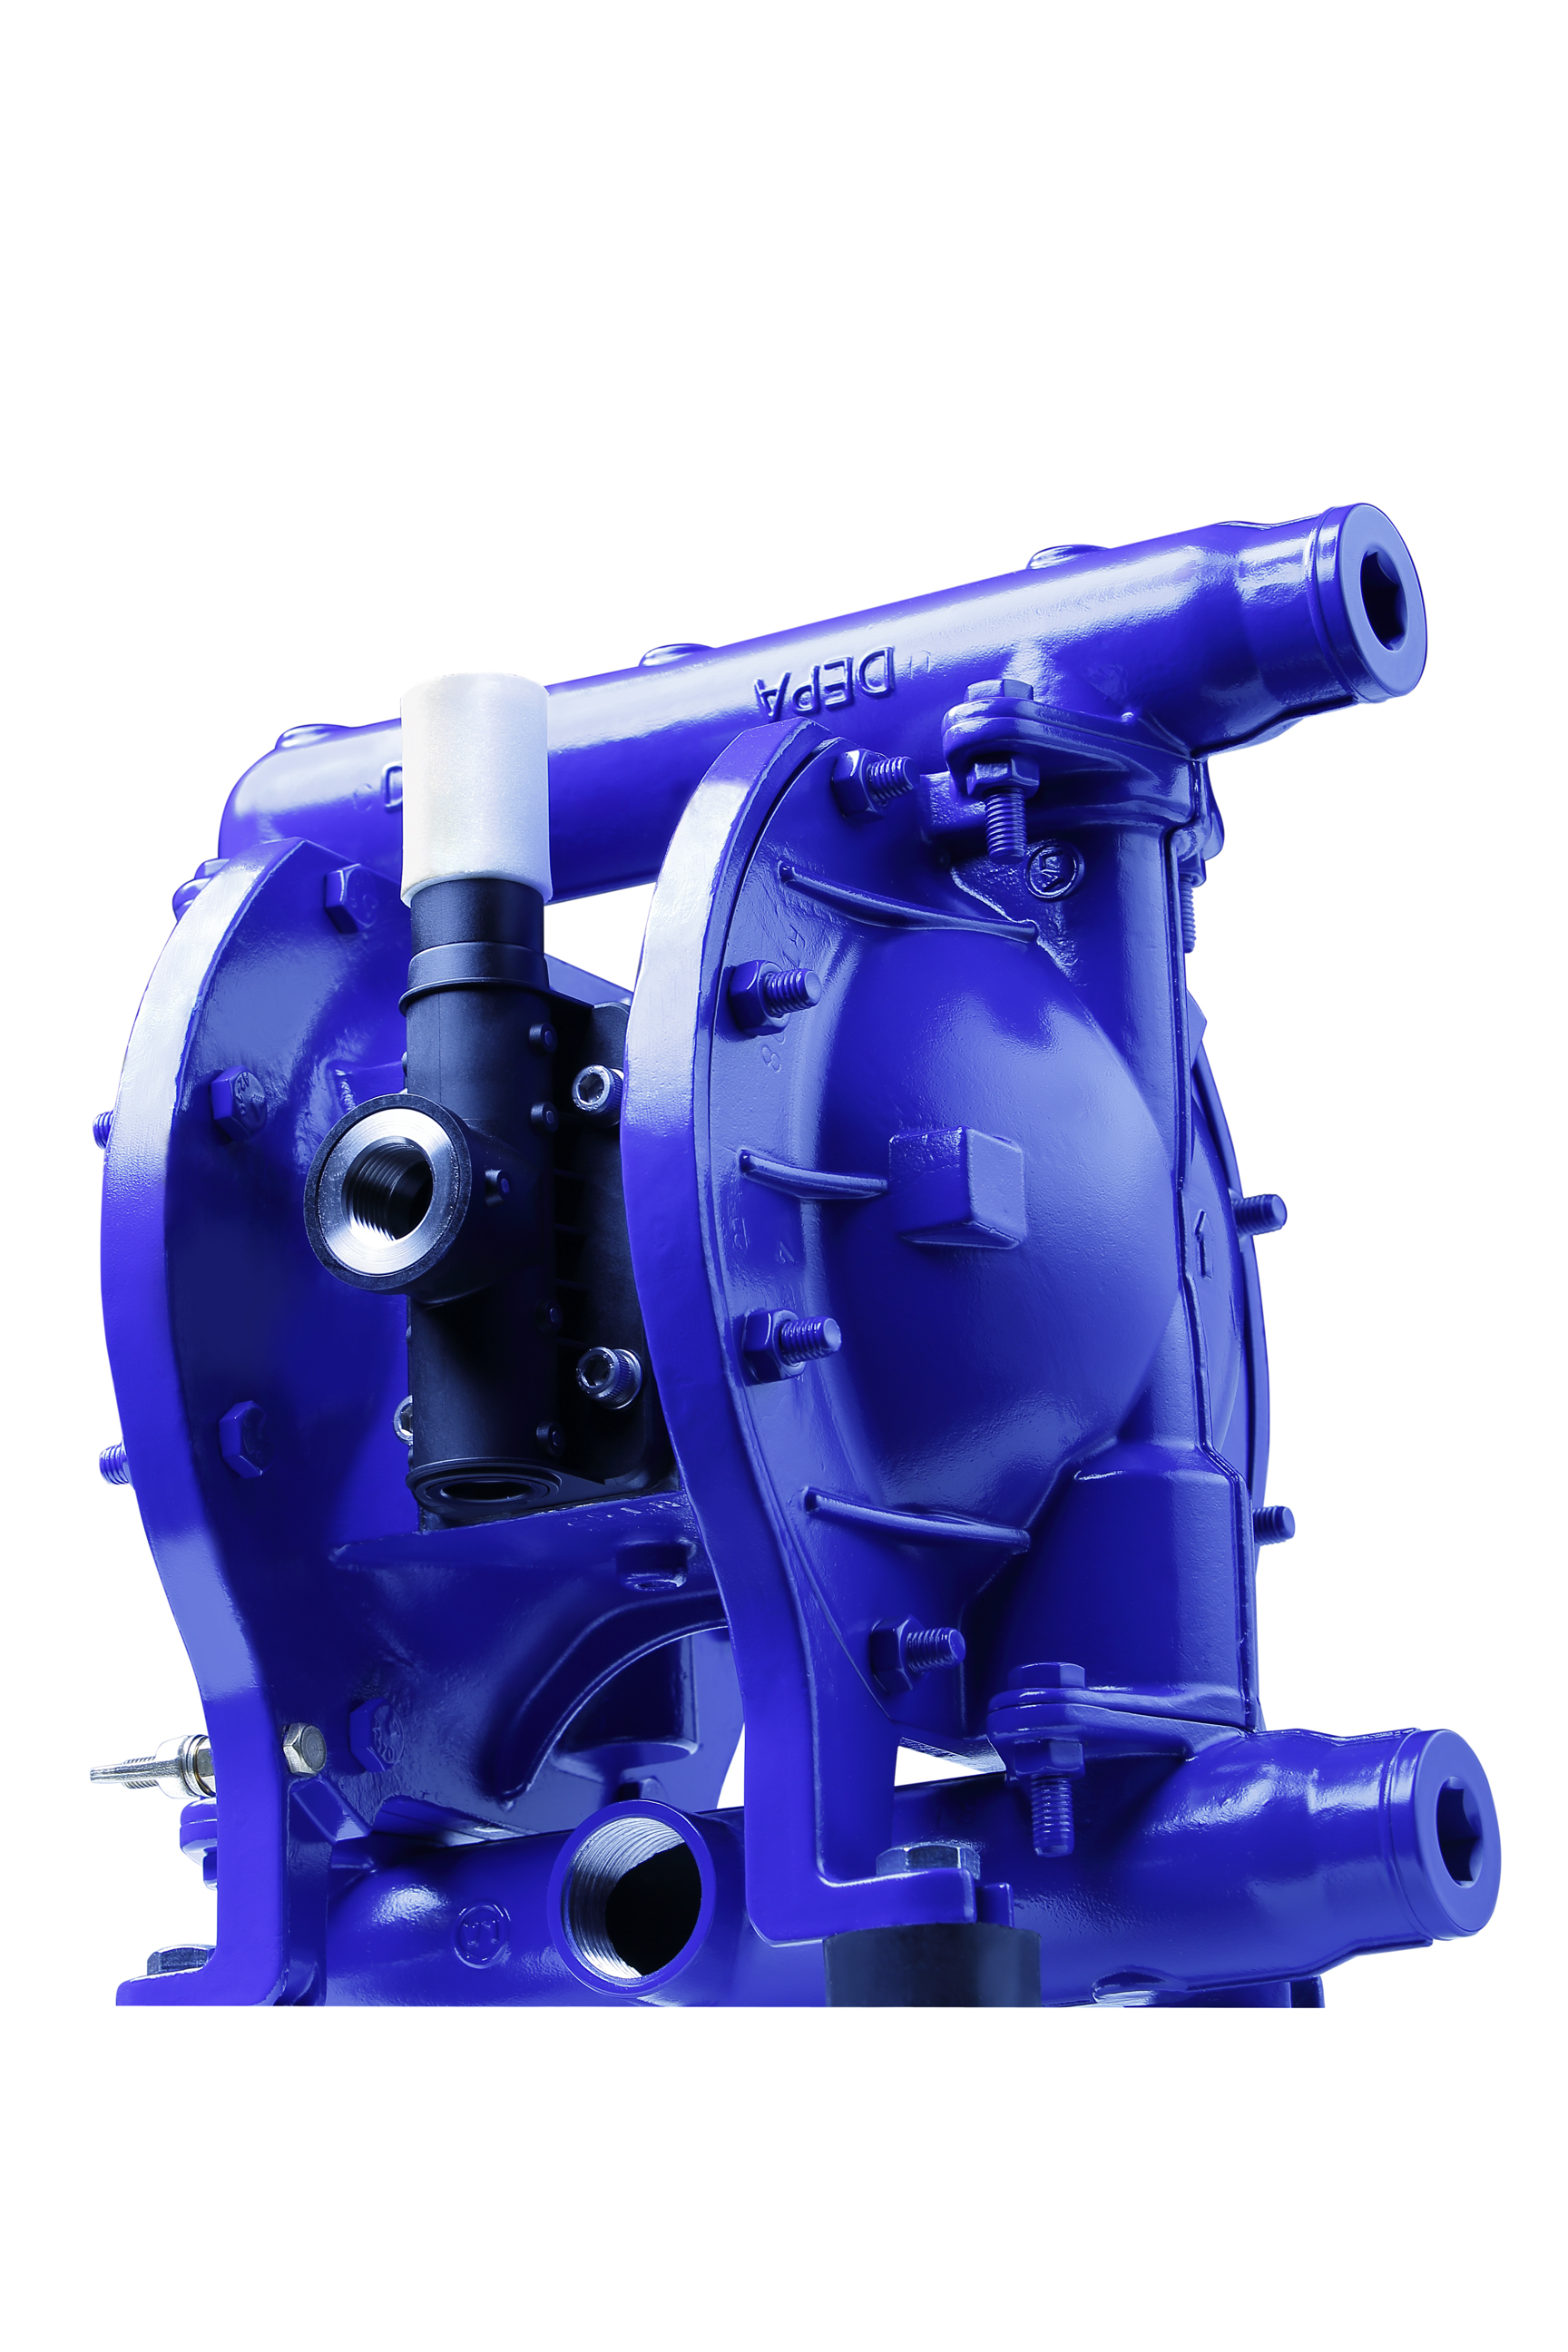 Crane' s next generation DEPA DH line of air operated double diaphragm pumps.